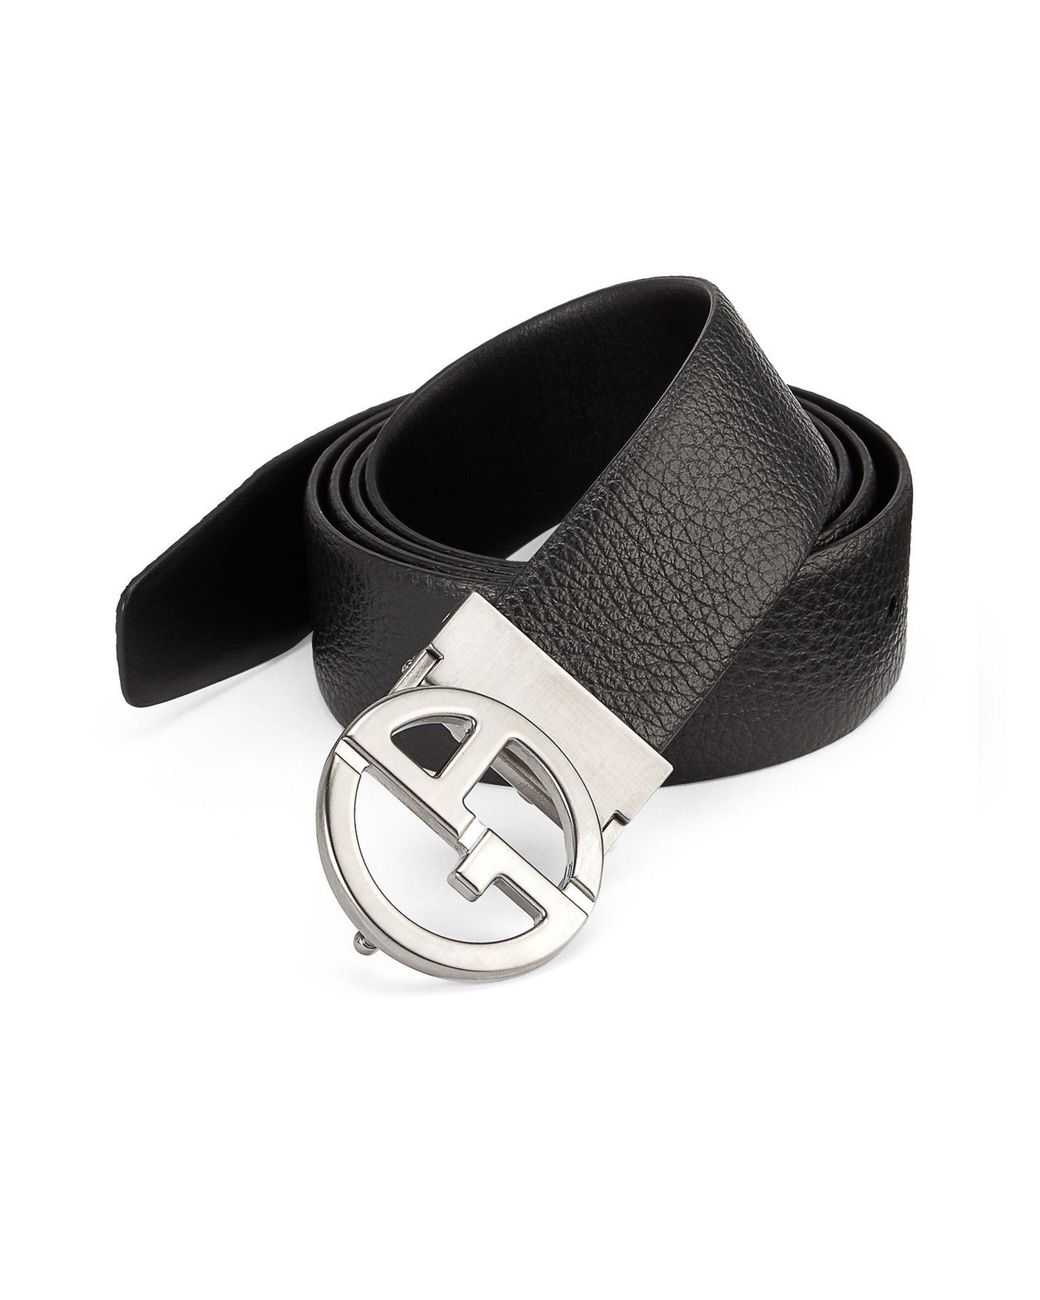 Emporio Armani Plate Leather Belt in Black for Men - Lyst